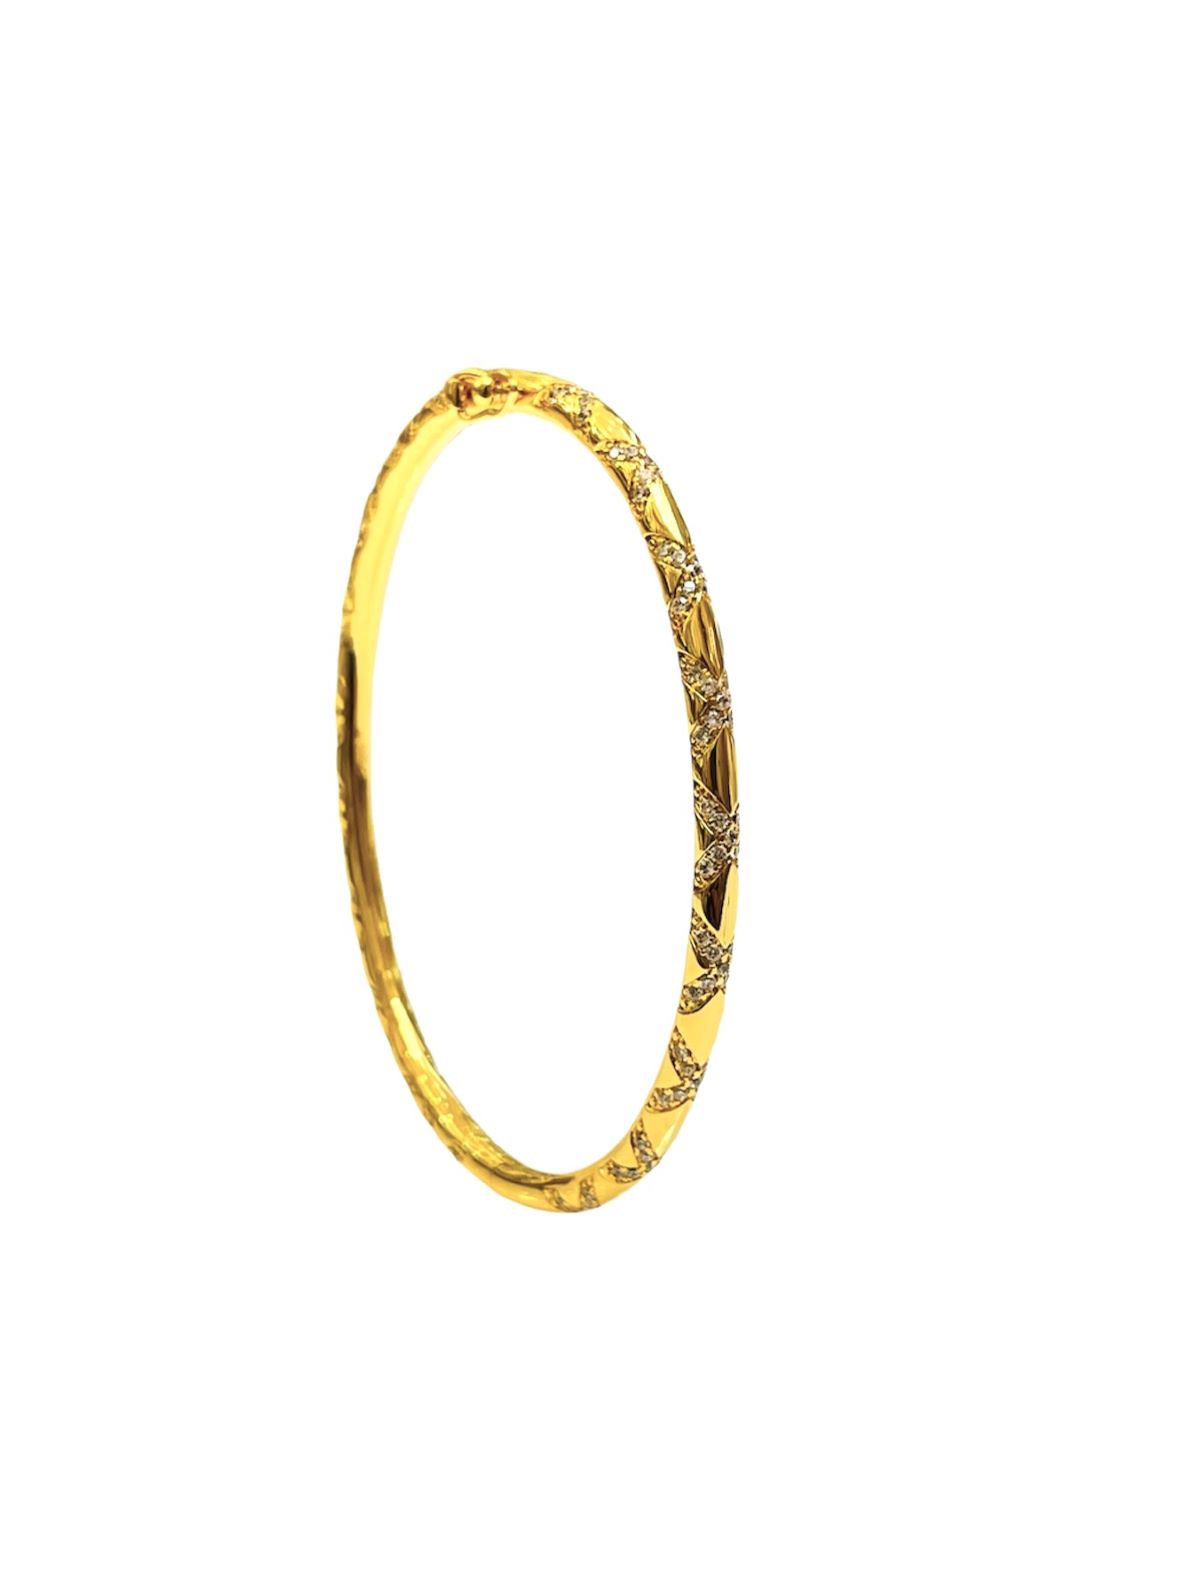 BRACELET GOLD PLATED WITH ZIRCON X